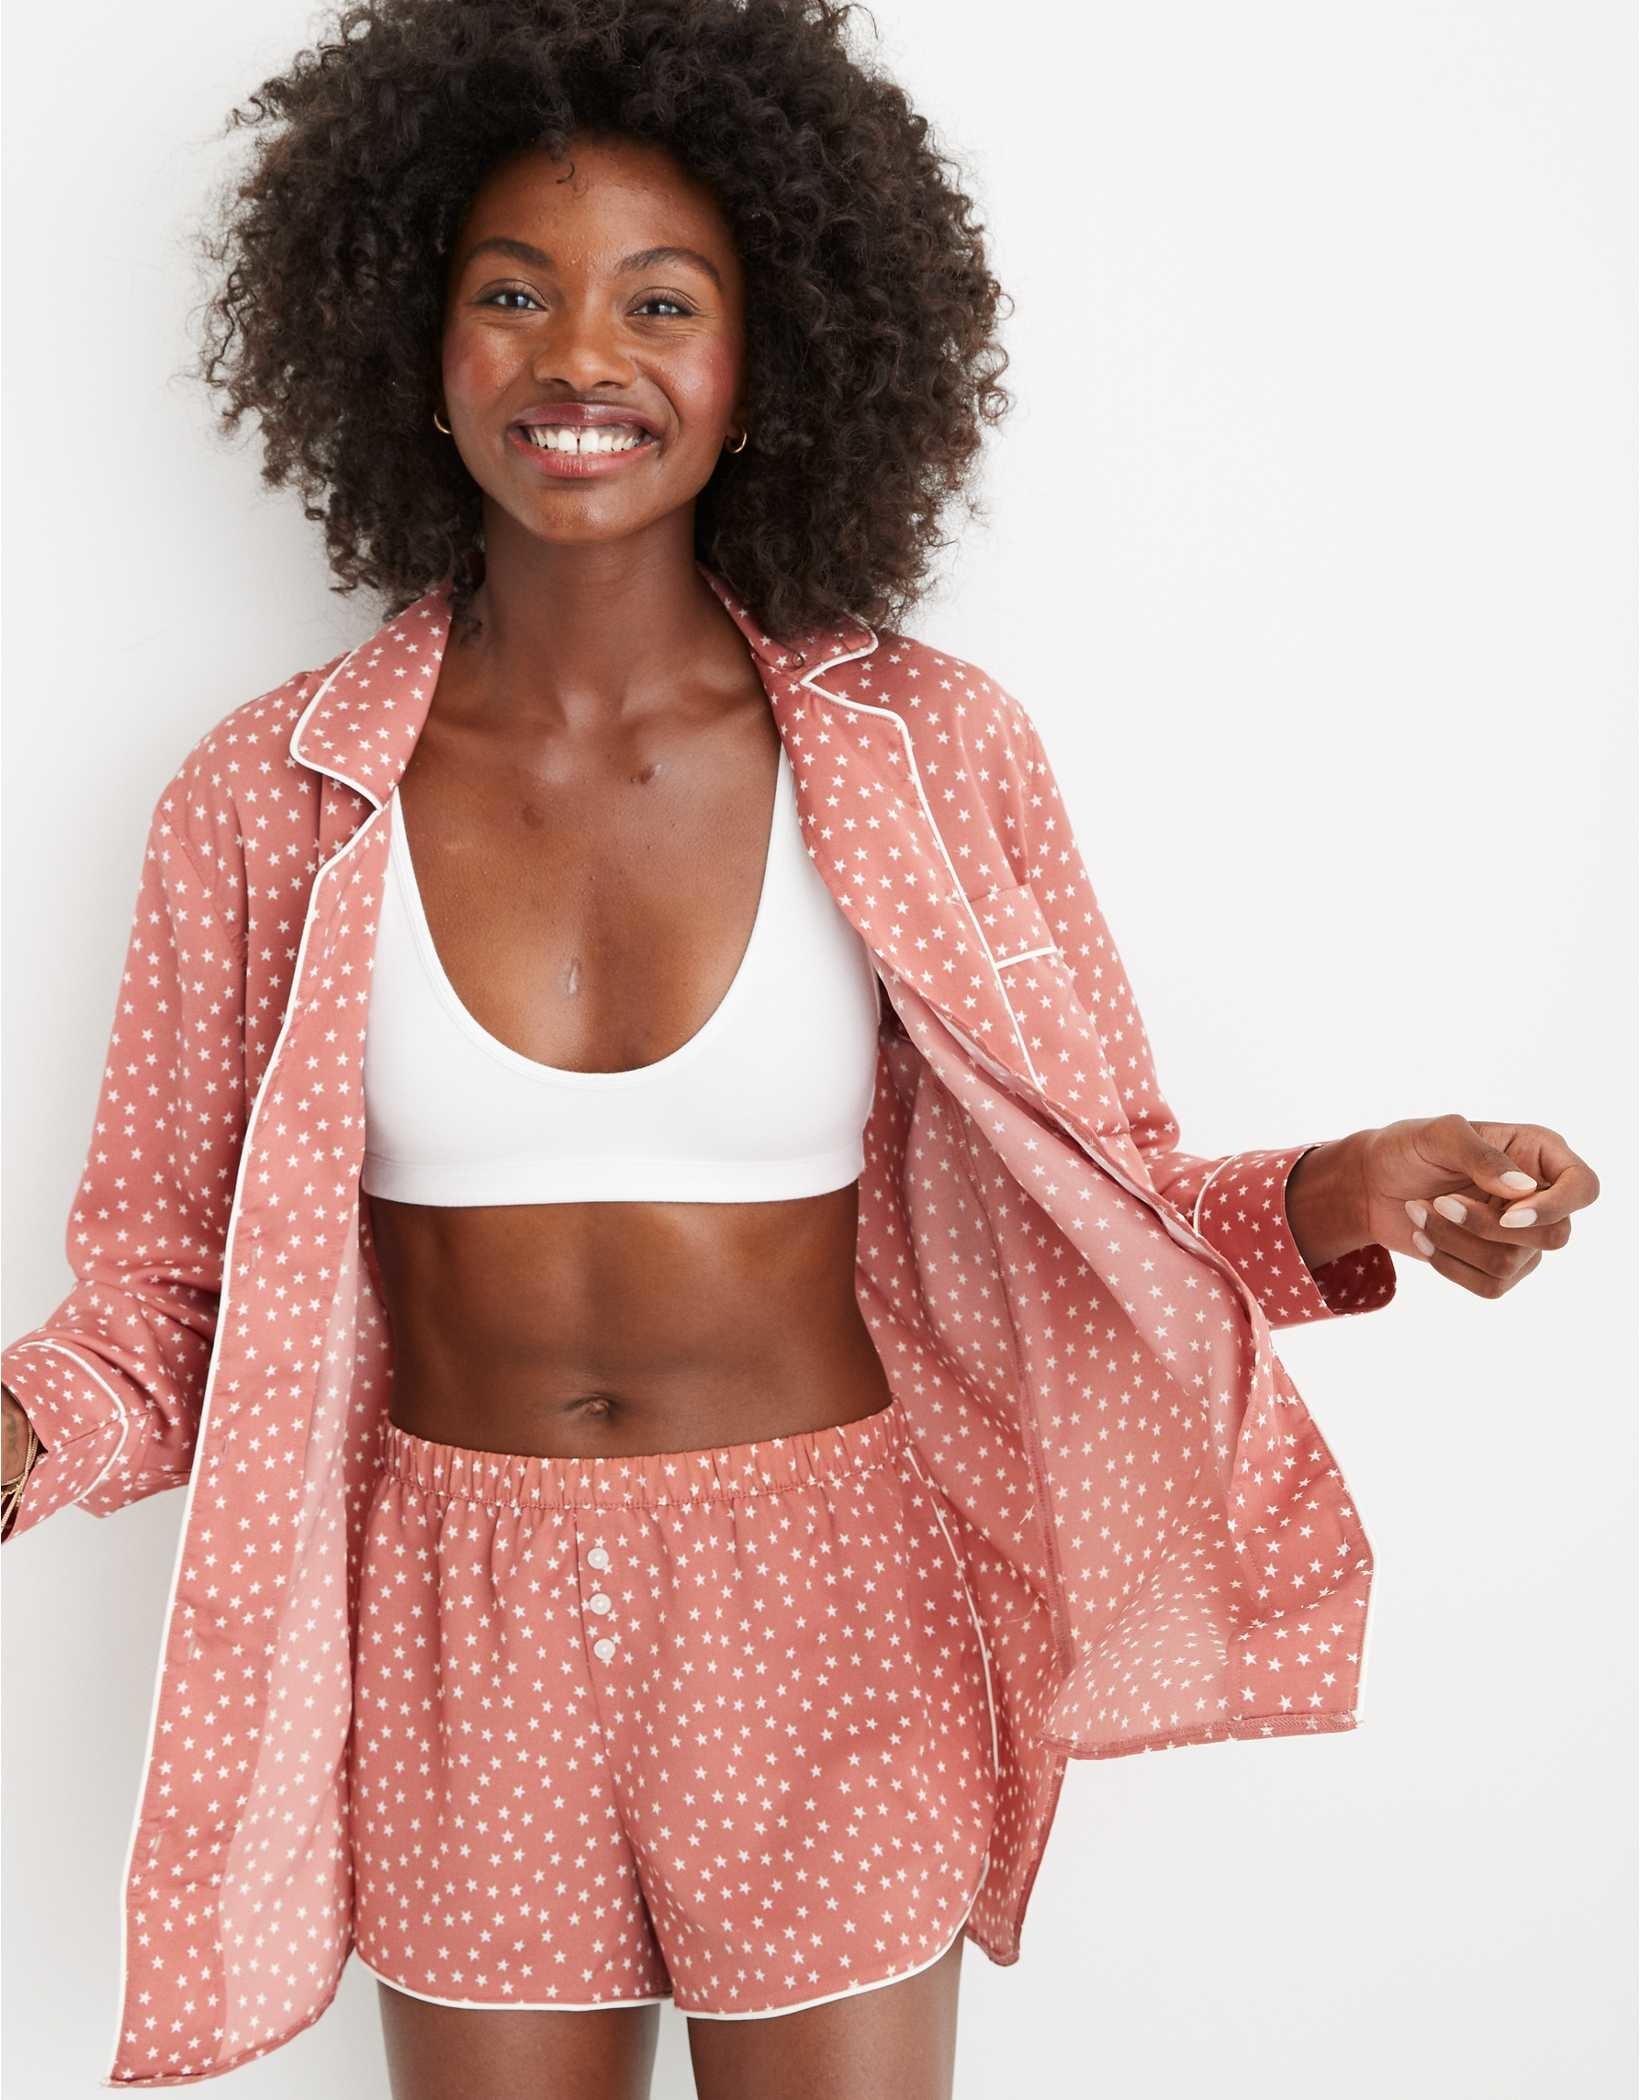 A model wearing the set in Lets Mauve with a sports bra